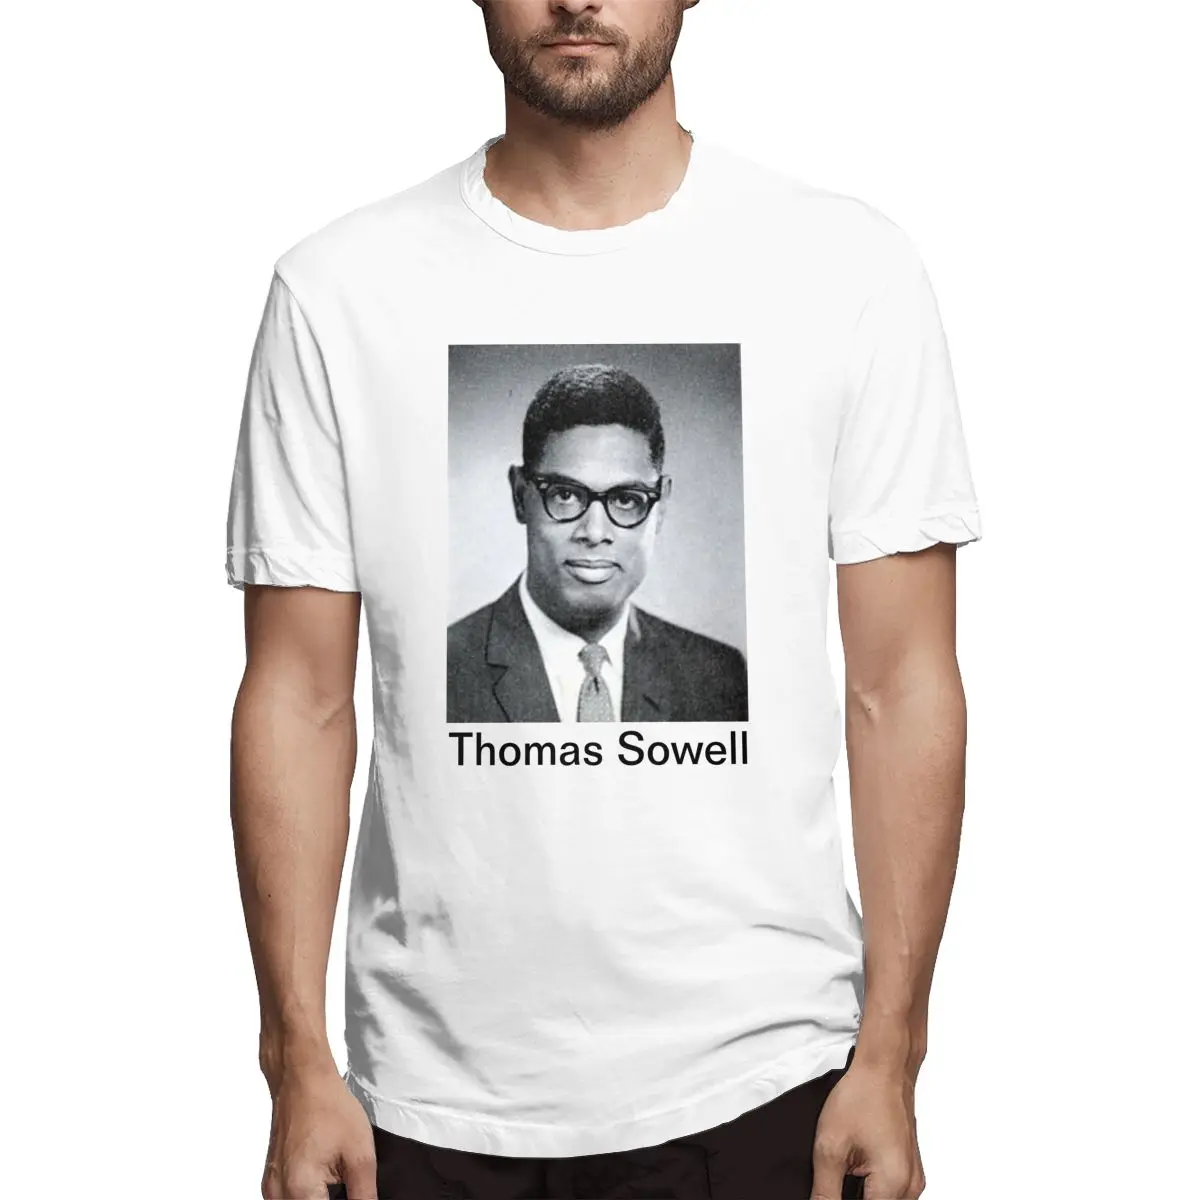 

Thomas Sowell Graphic Tee Men's Short Sleeve T-shirt Funny Tops